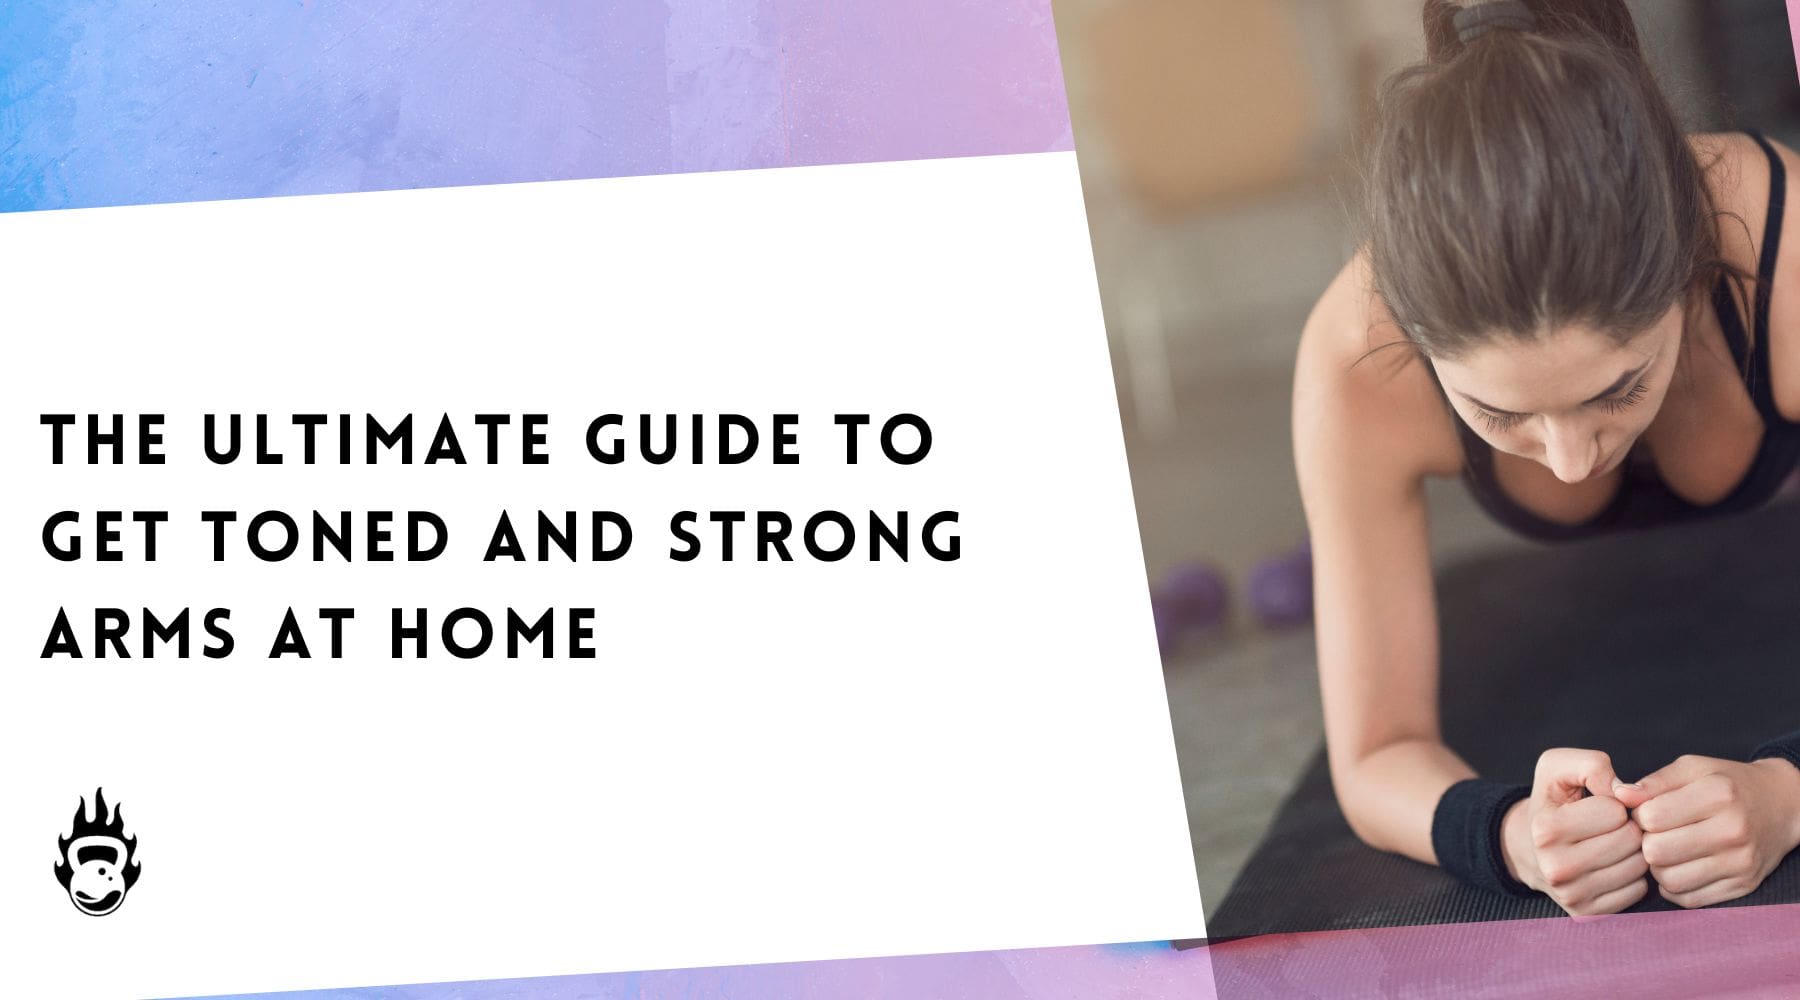 The Ultimate Guide To Get Toned And Strong Arms At Home